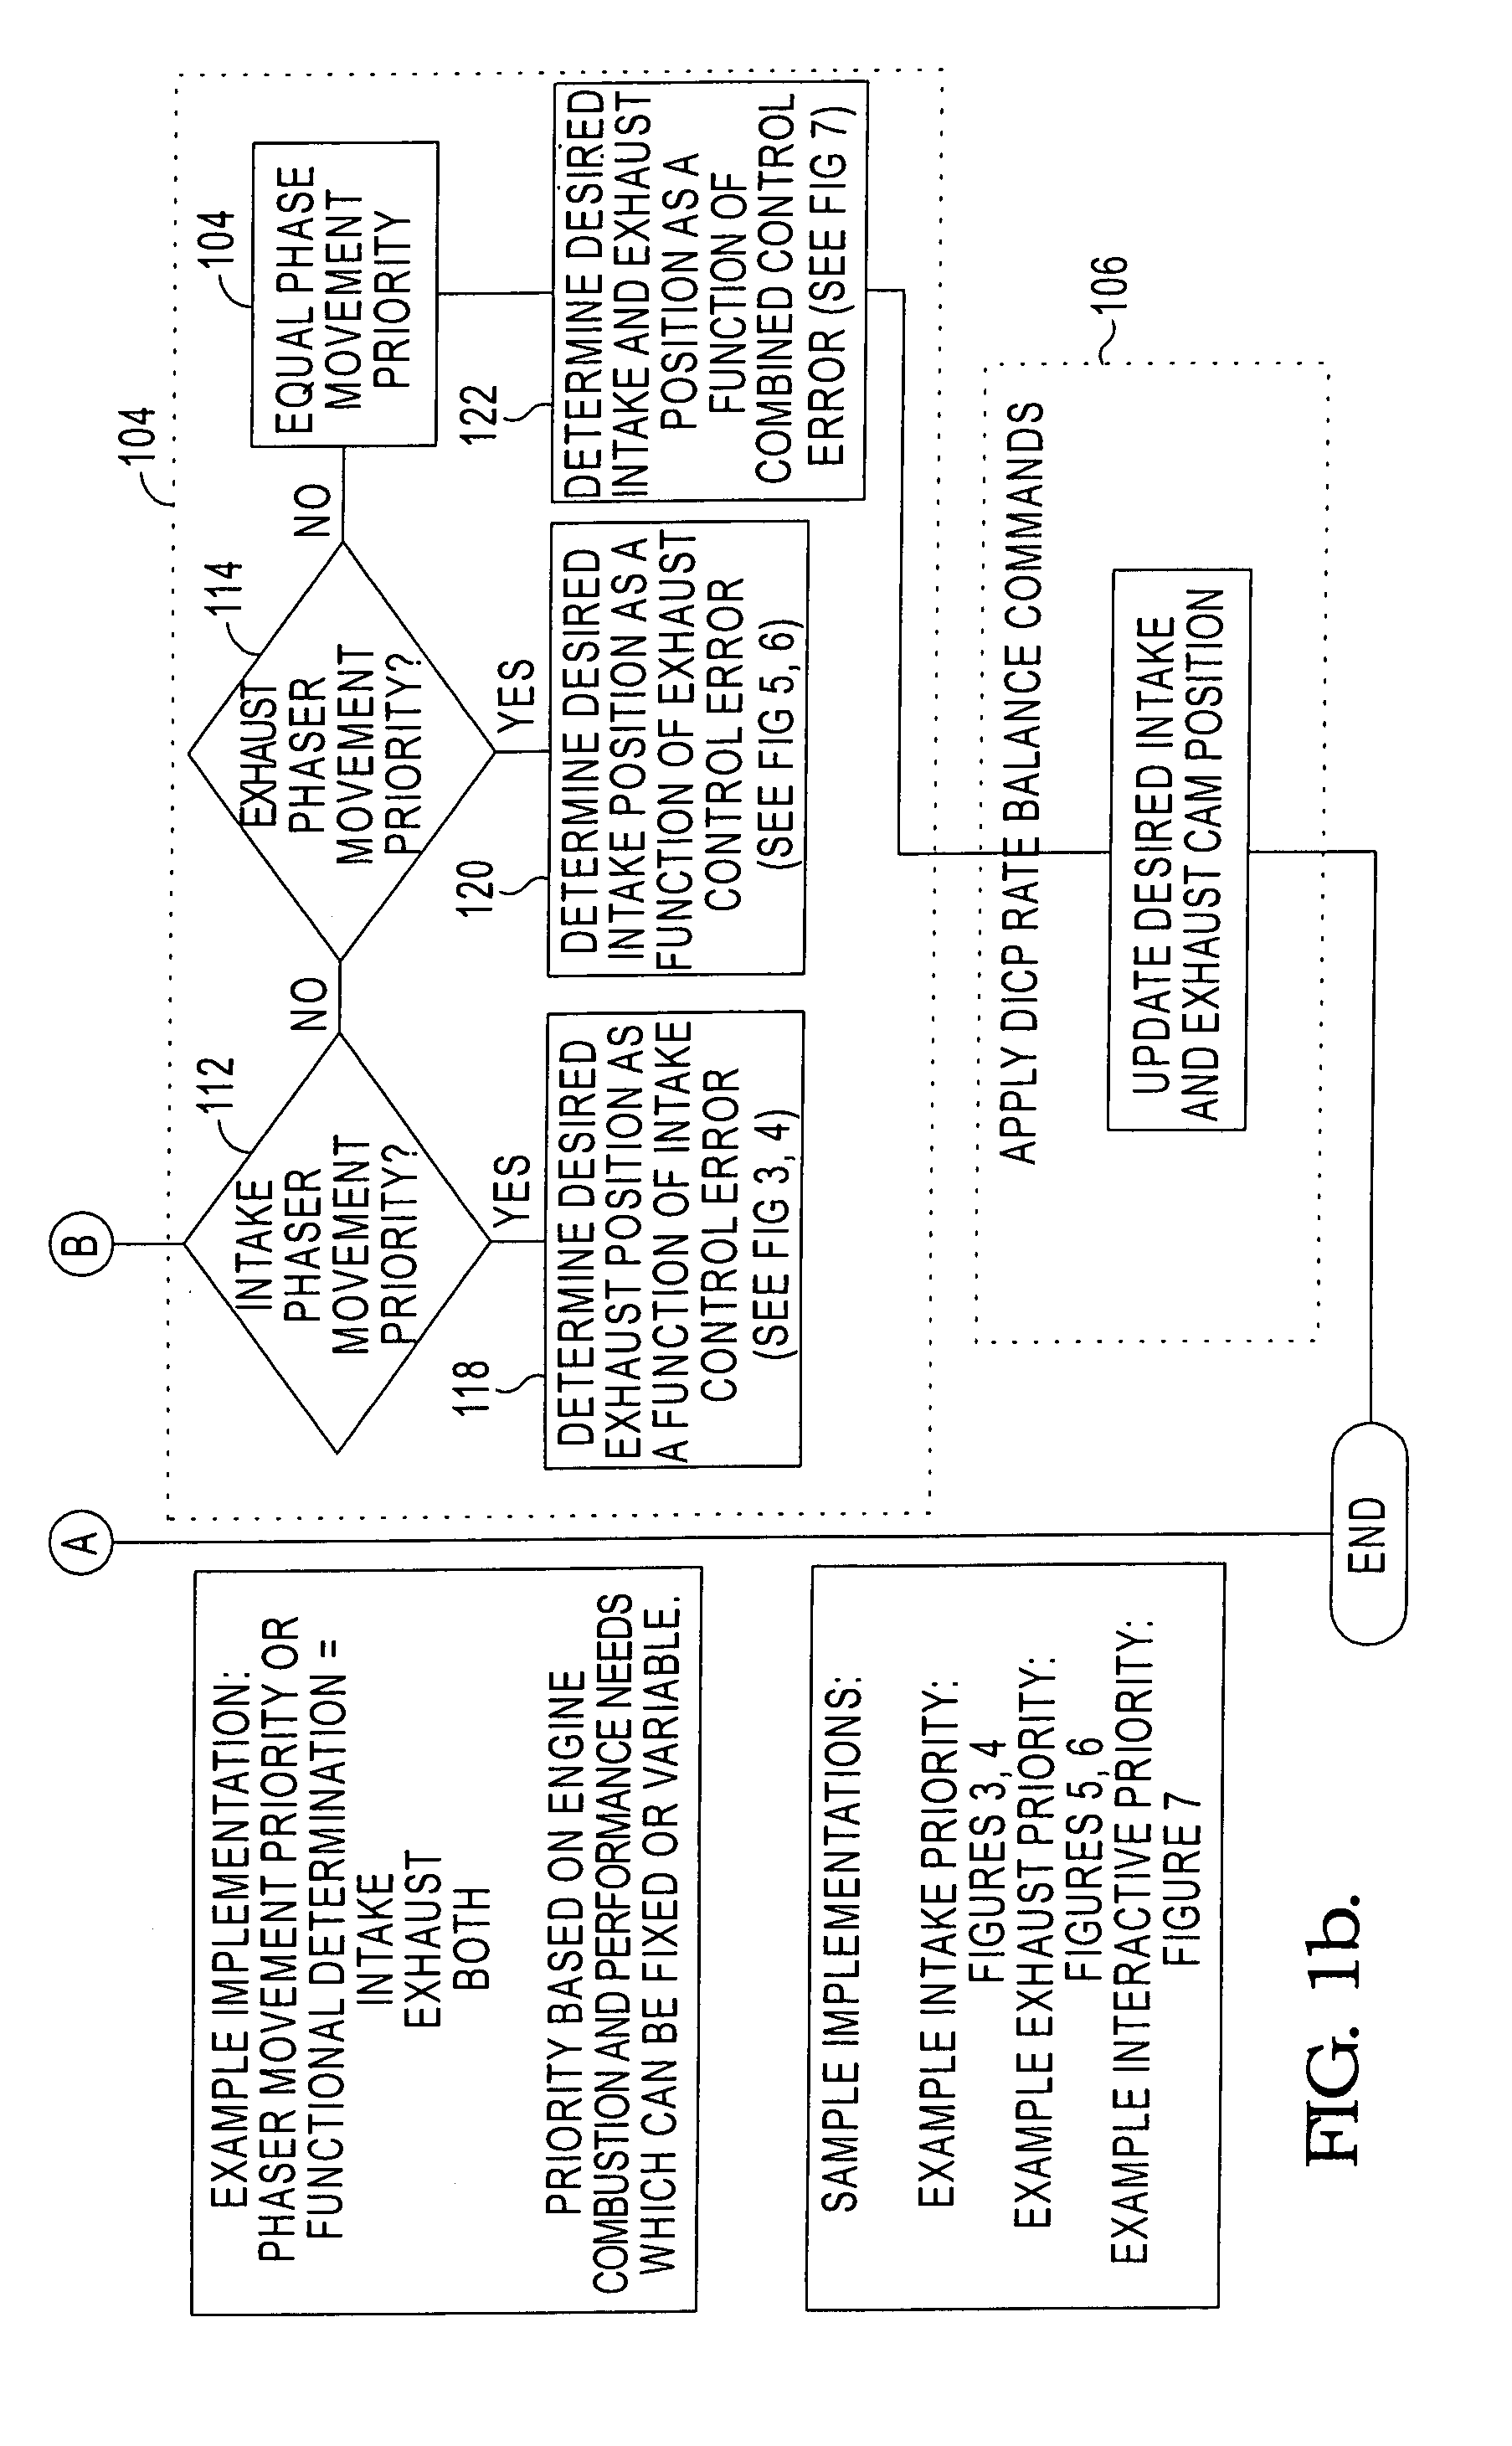 Rate limiting and balancing control system for dual independent camshaft phasing